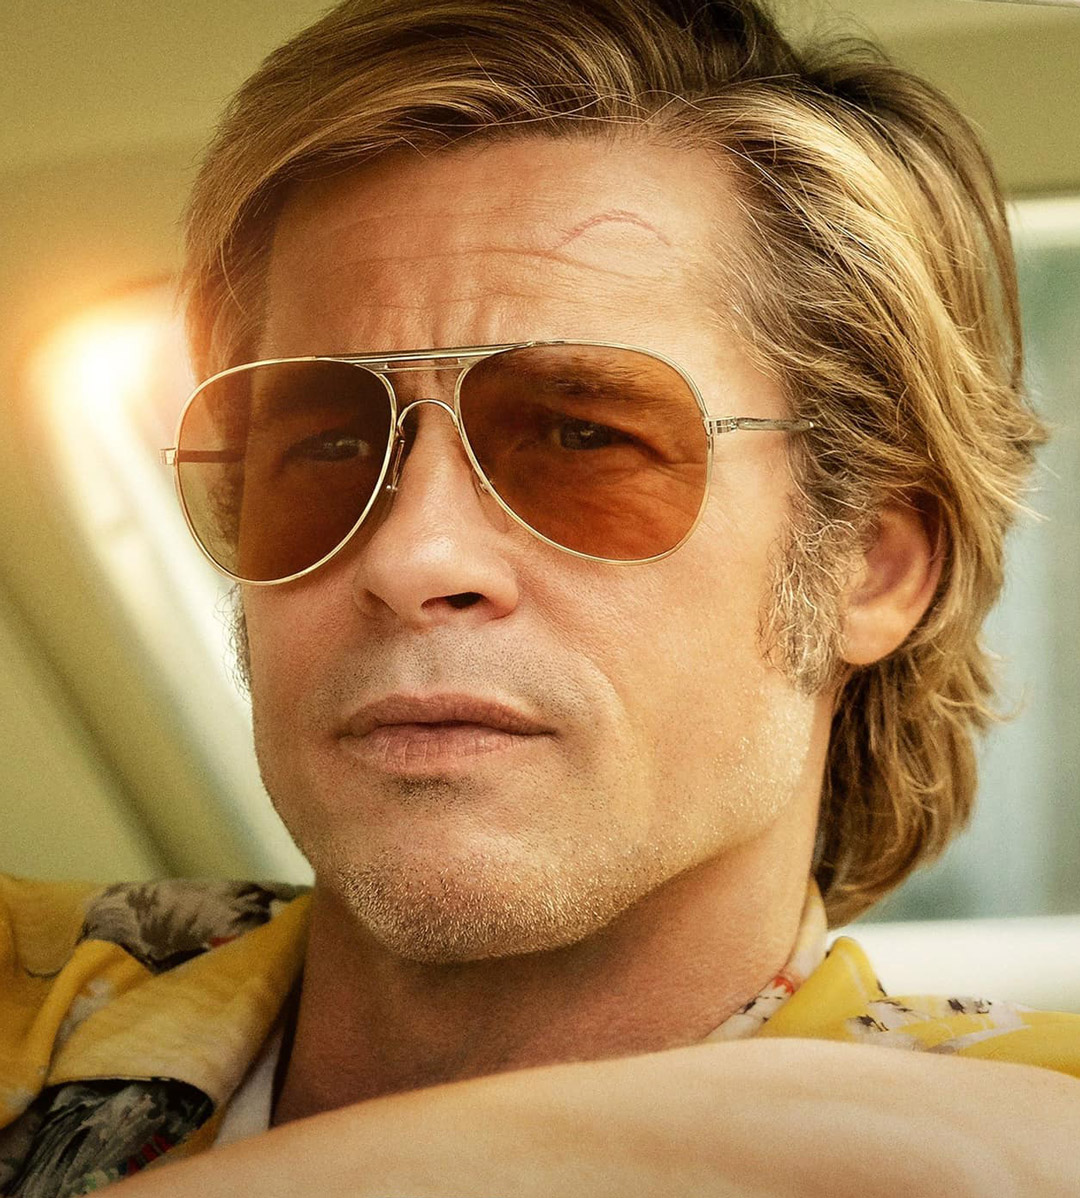 vintage-sunglasses-brad-pitt-once-upon-a-time-in-hollywood-2.jpg